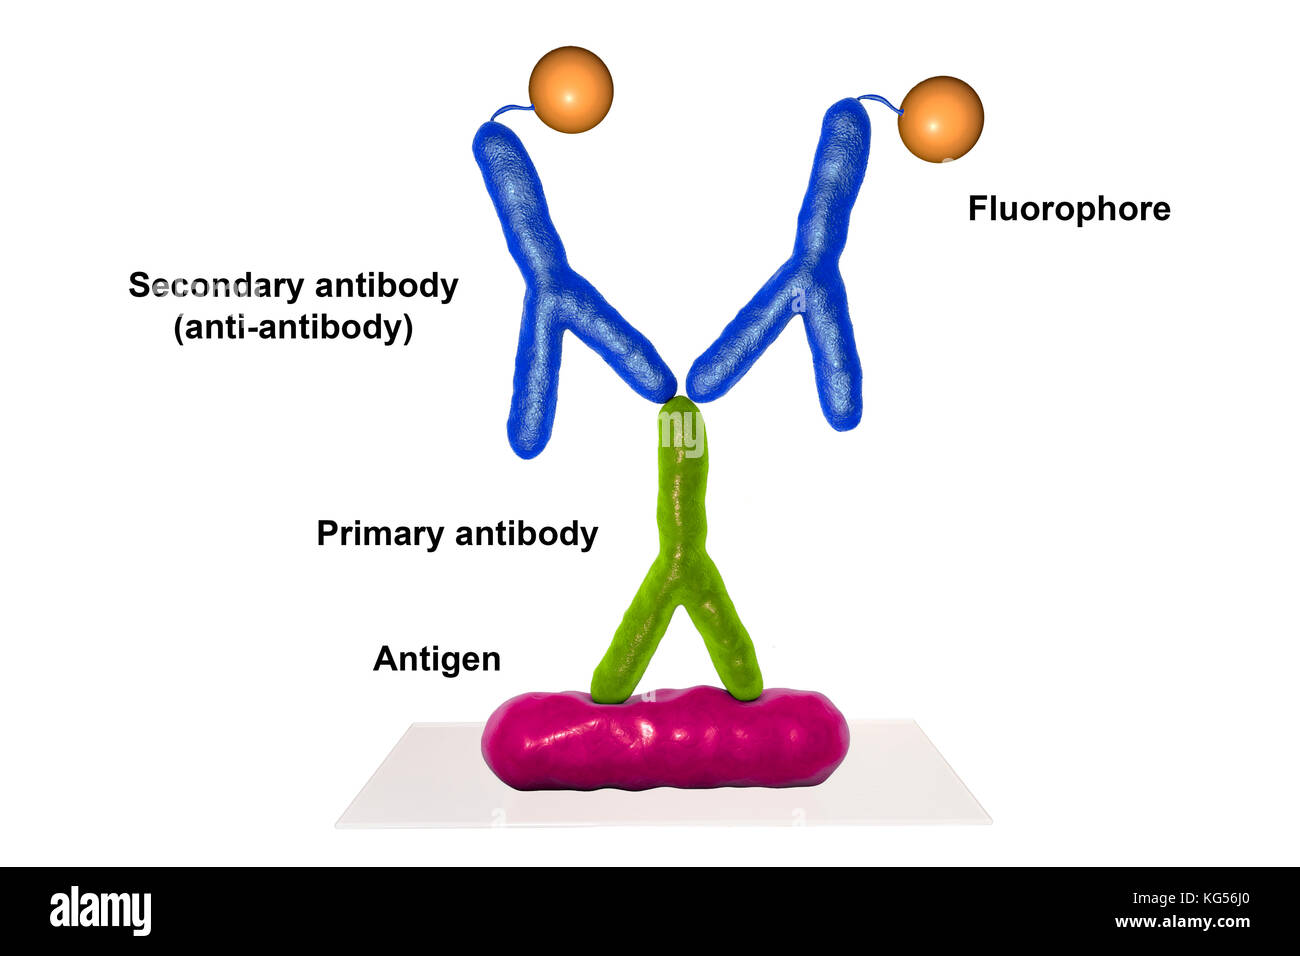 Mechanism of indirect immunofluorescence test, computer illustration. Immunofluorescence is a cell imaging technique based on the use of antibodies to label a specific target antigen (bacteria, cancer cells, other) with a fluorescent dye (also called fluorophore or fluorochrome). The fluorescent dye allows visualization of the antigen distribution in the sample under a fluorescent microscope. Indirect immunofluorescence uses two antibodies, the primary and the secondary. Stock Photo